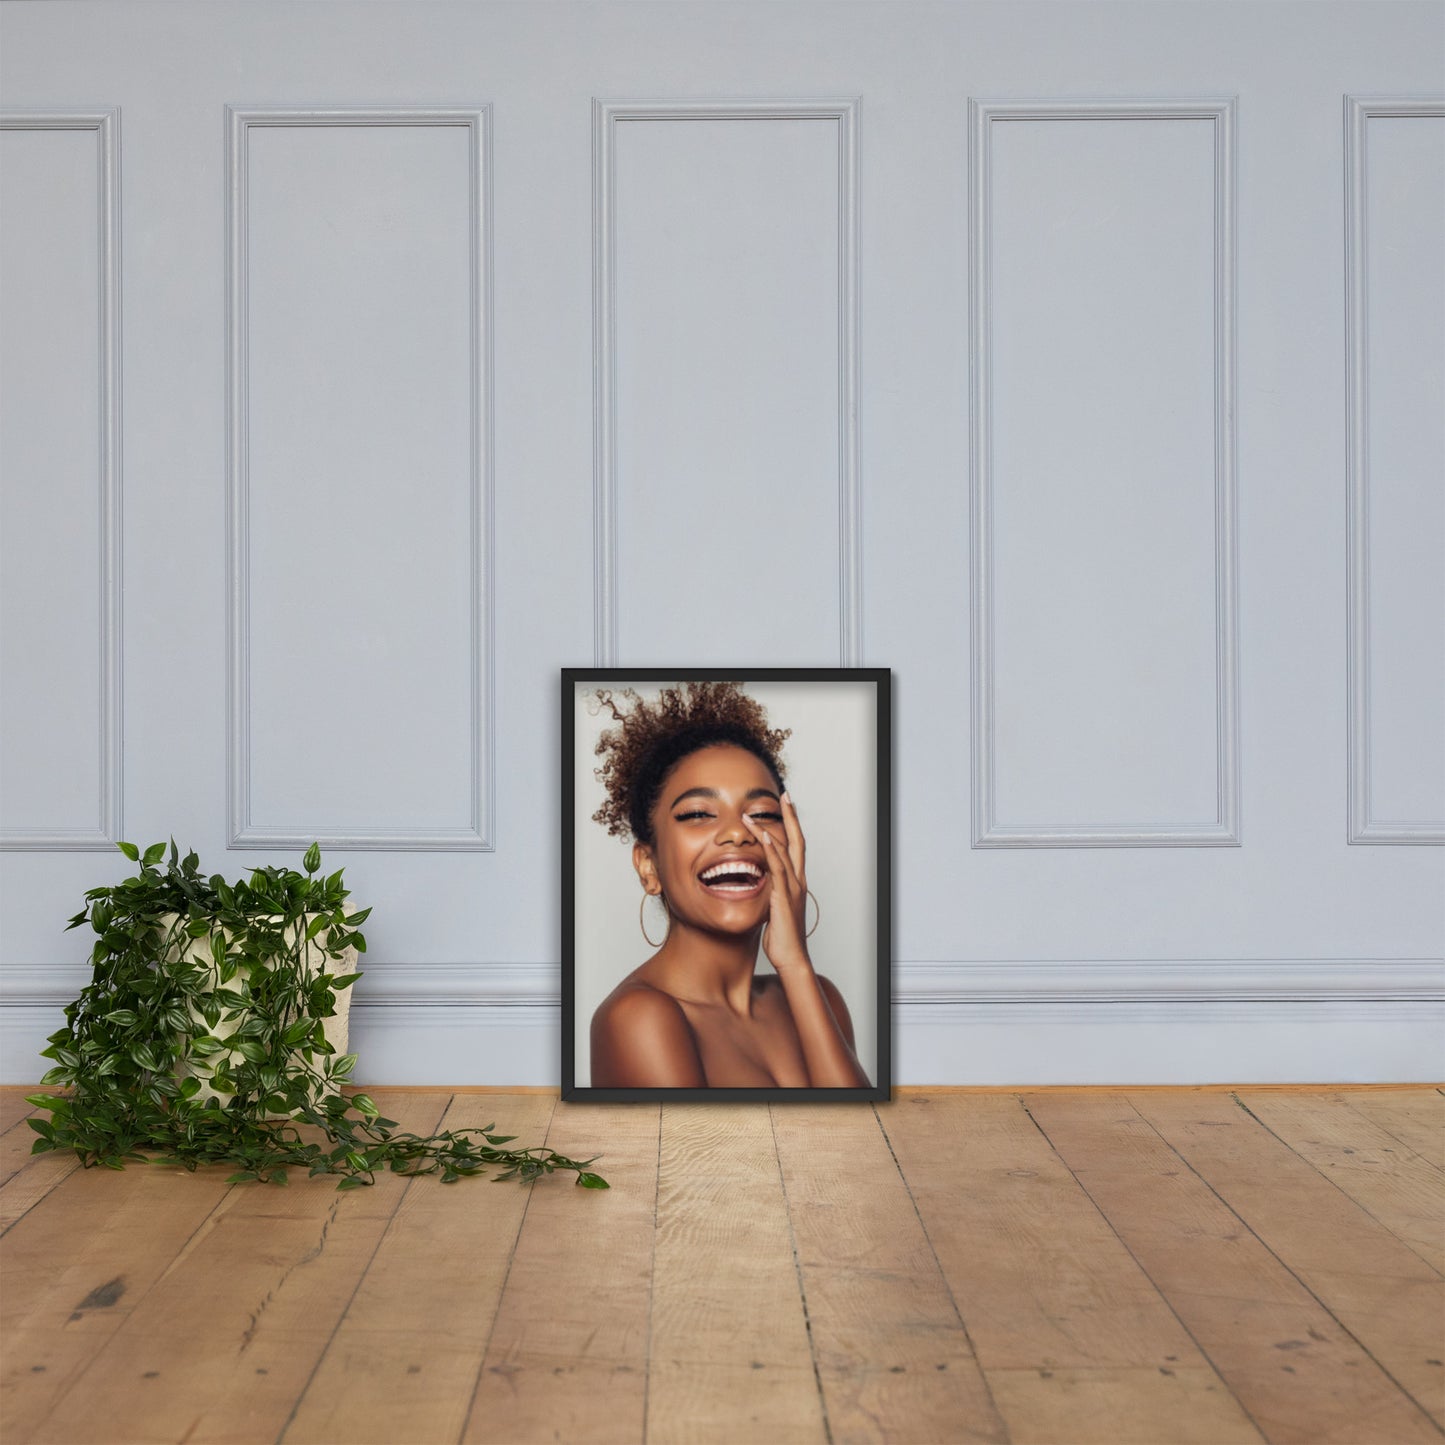 Framed Poster Wall Art Vertical: Priceless Smiles and Laughter (Print Model 005)